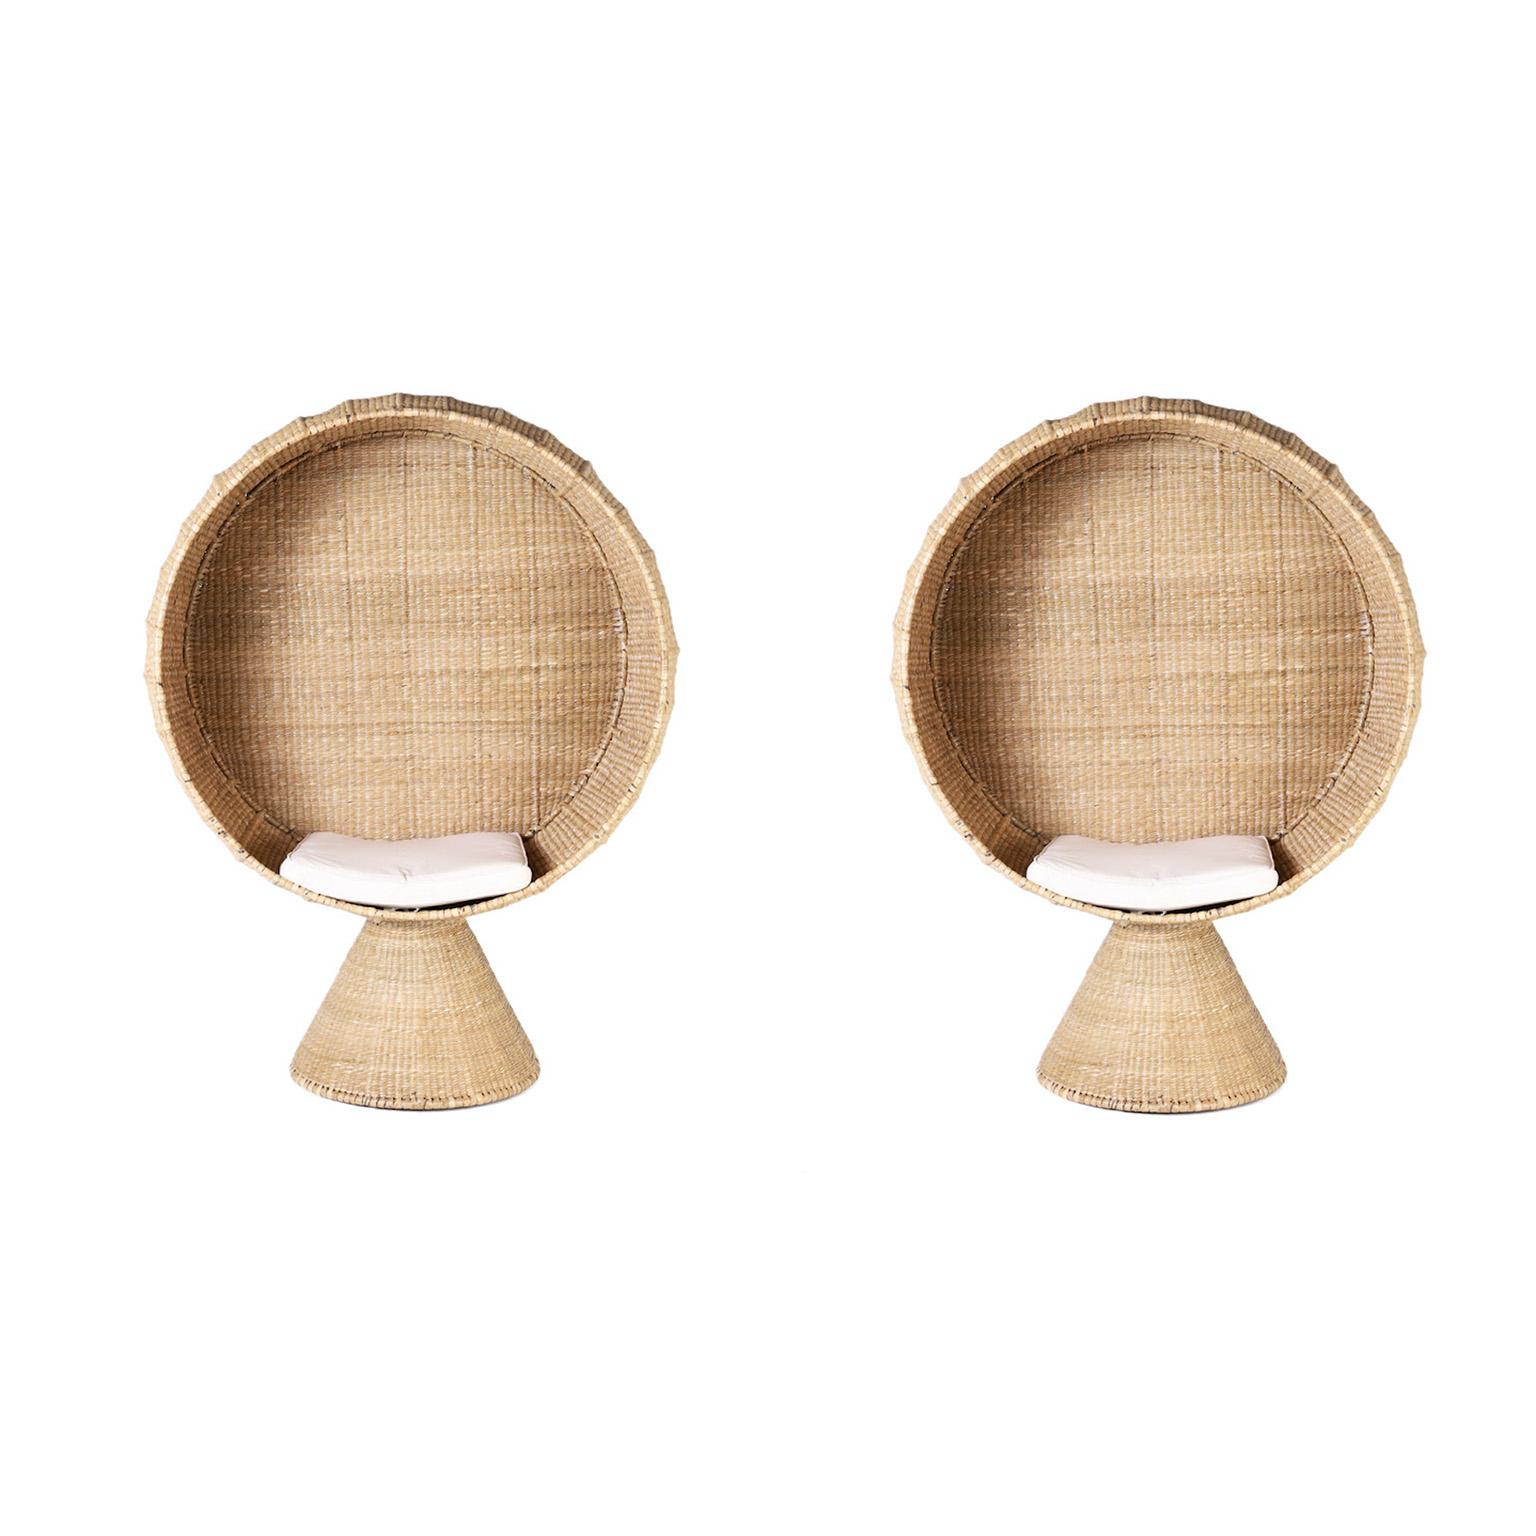 Striking pair of large mid century style chairs hand crafted in reed wrapped over a metal frame in a dramatic spherical form on a tapered pedestal. One of many exciting new designs from the FS Flores Collection designed and offered exclusively by